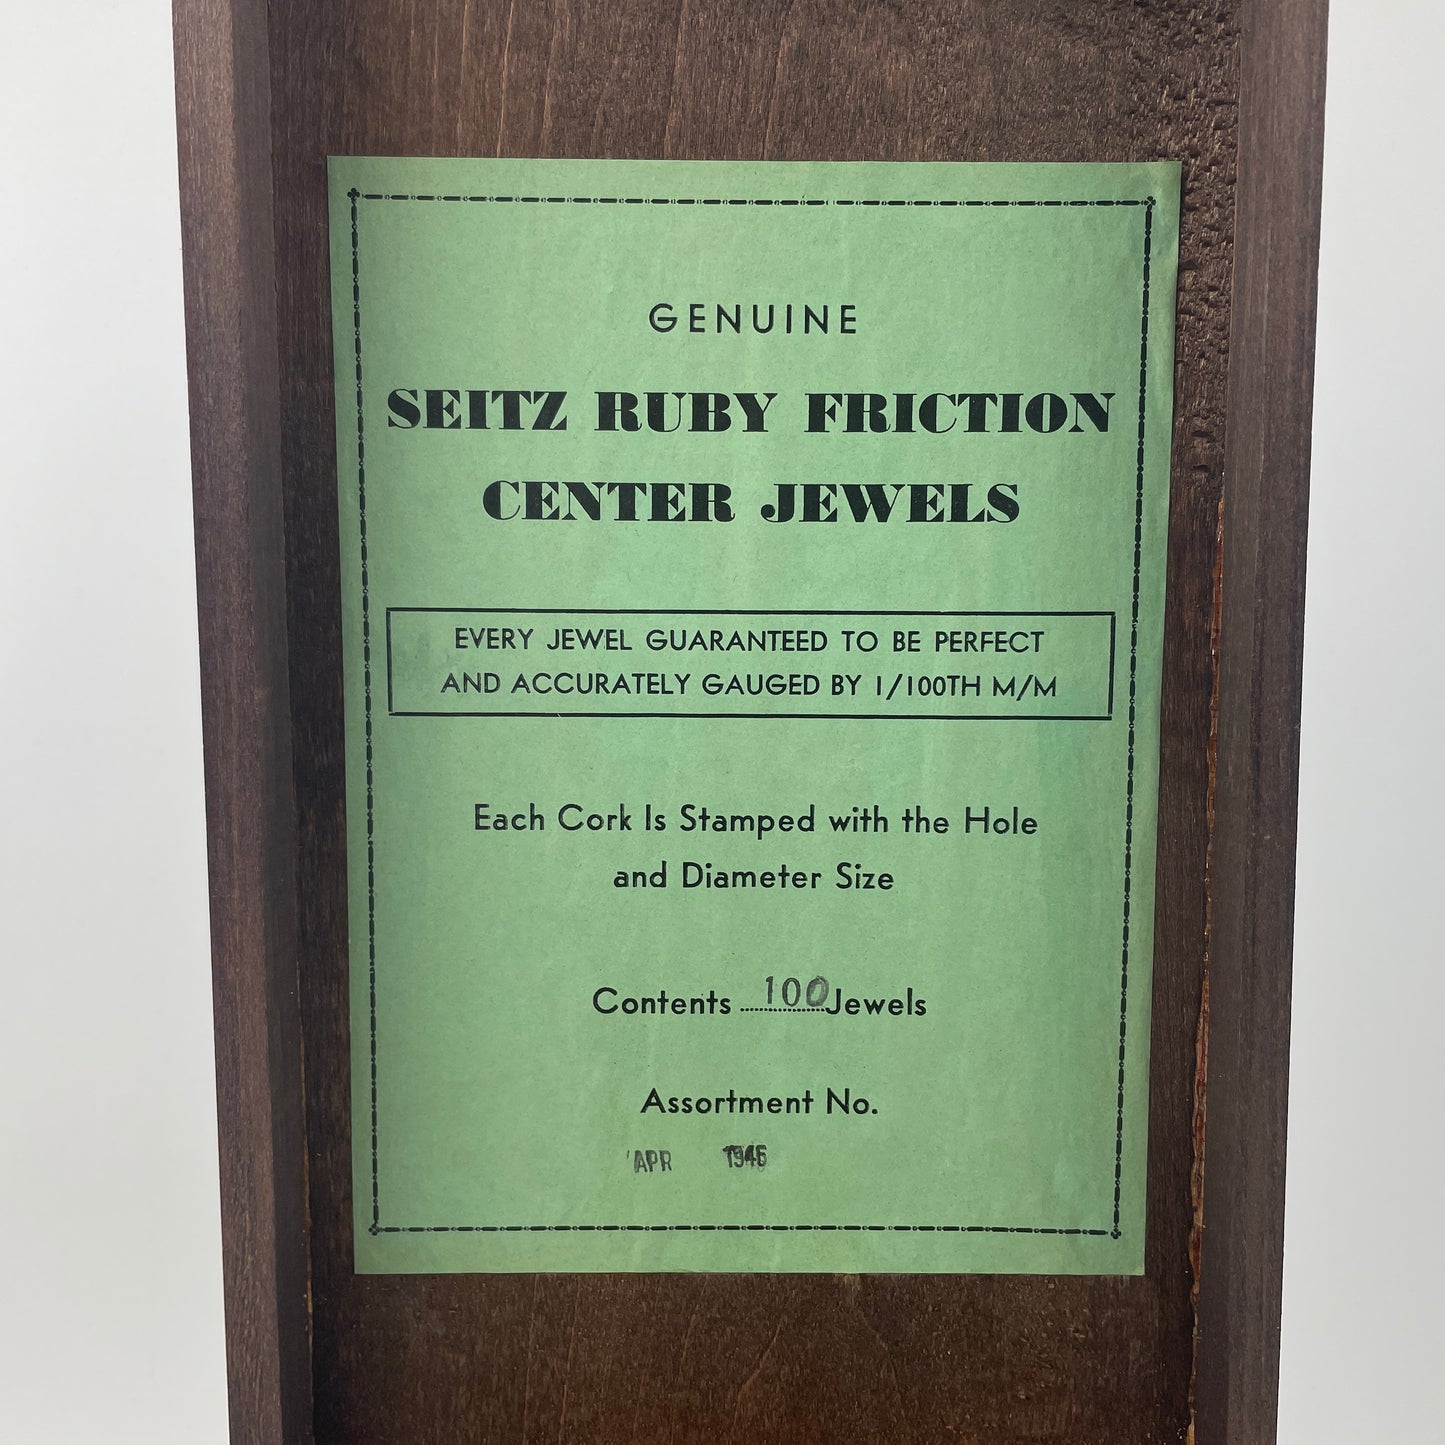 May Lot 1- Genuine Seitz Ruby Friction Center Jewel Assortment